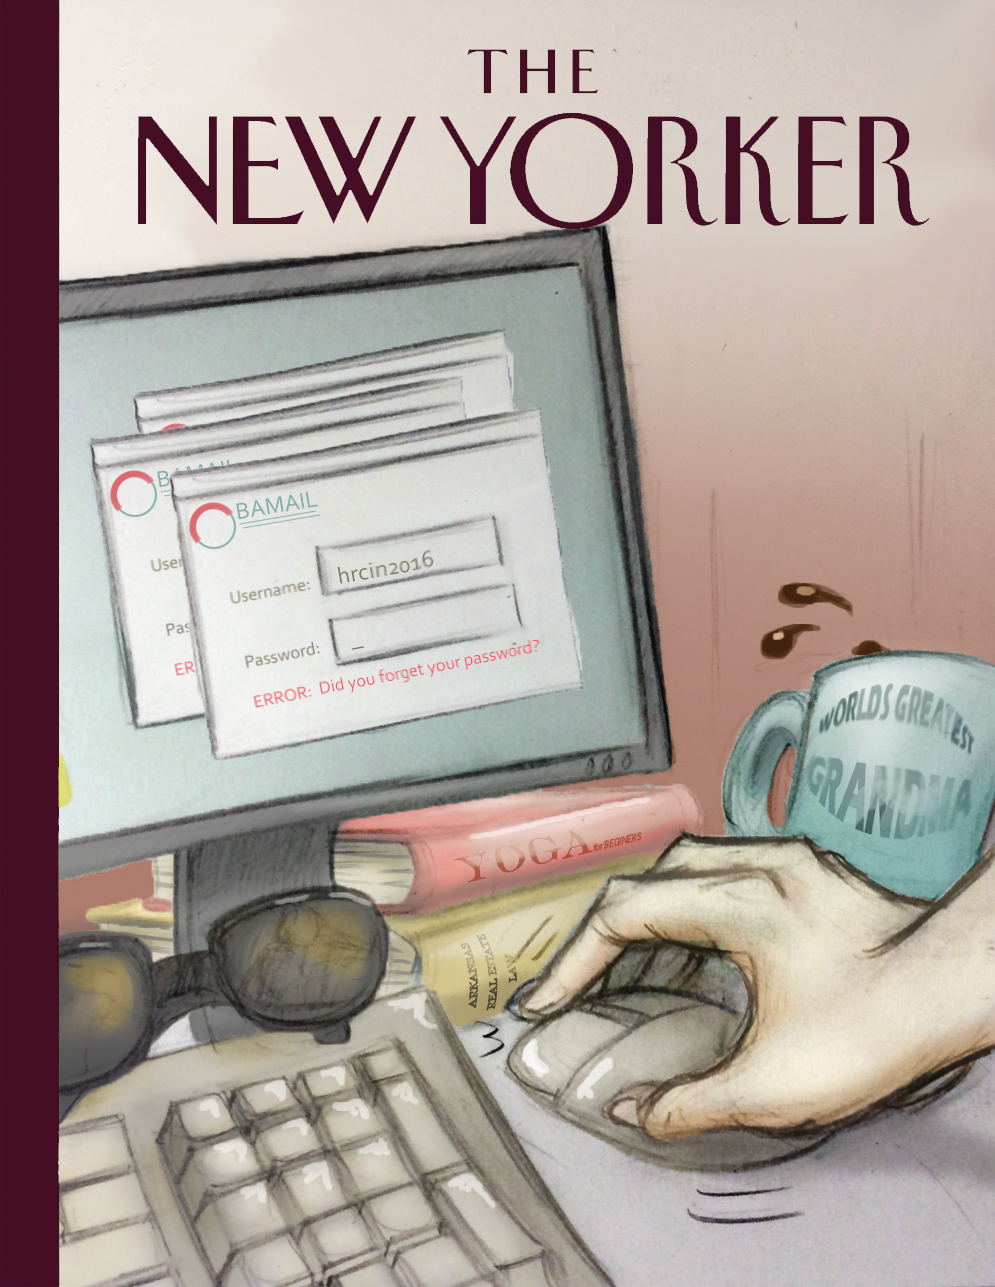 The New Yorker new yorker